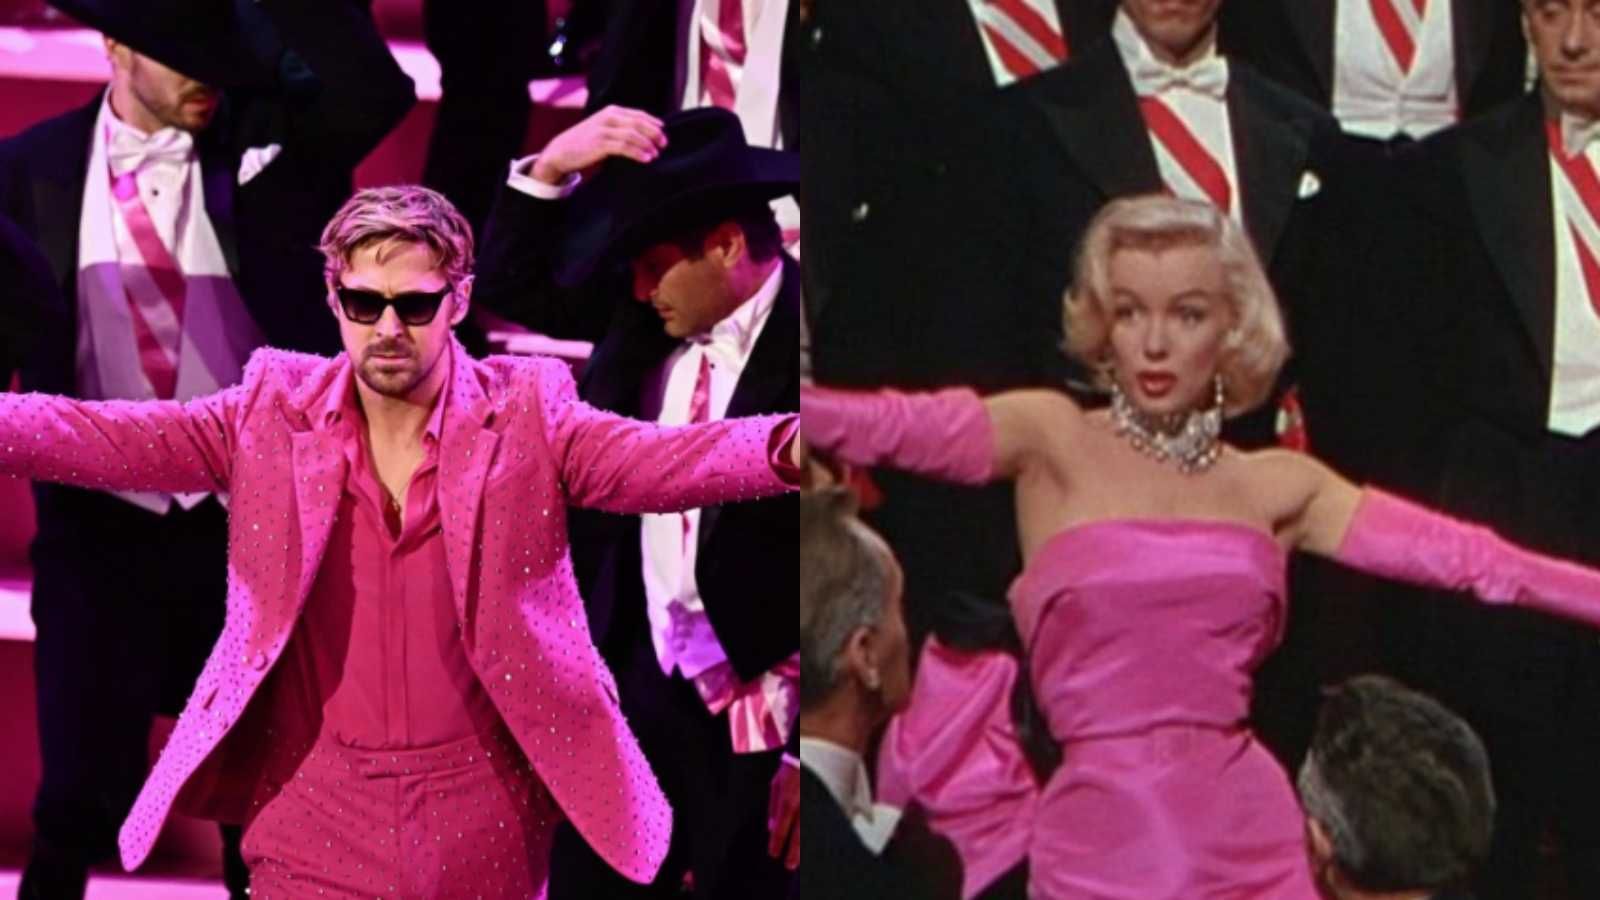 Ryan Gosling's costume was a tribute to Marilyn Monroe